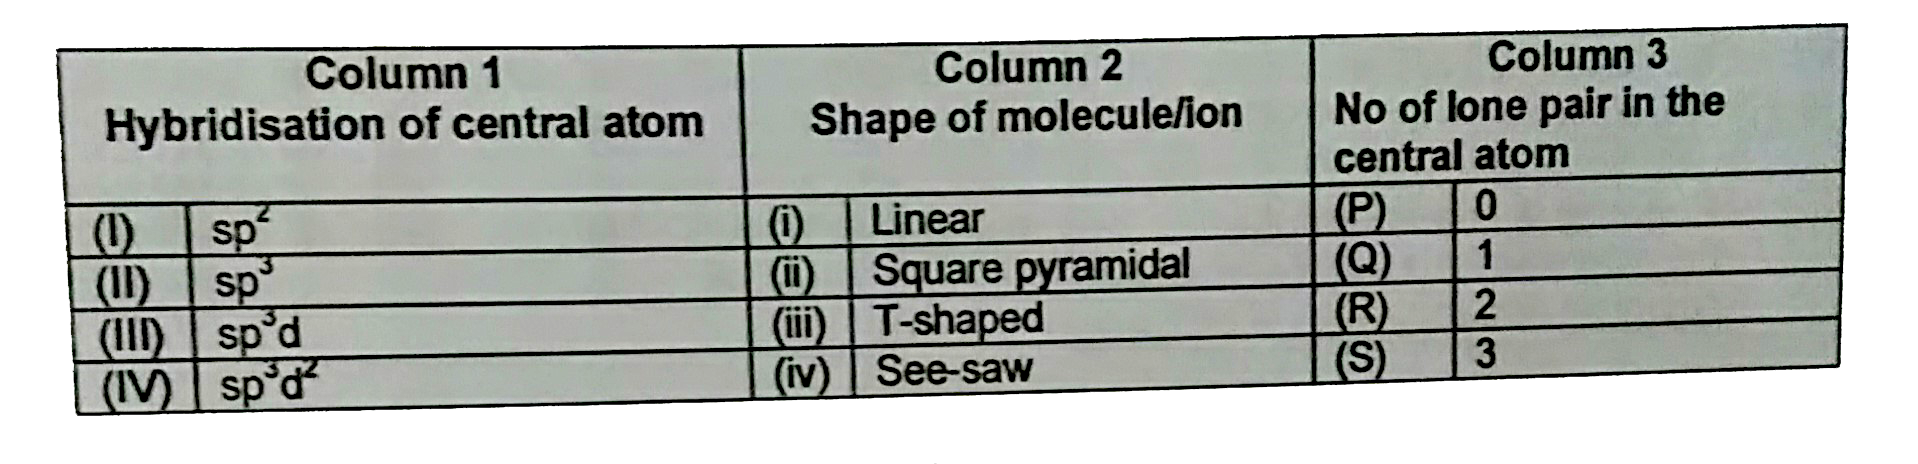 For the molecule Xe)F(2), the only correct combination is